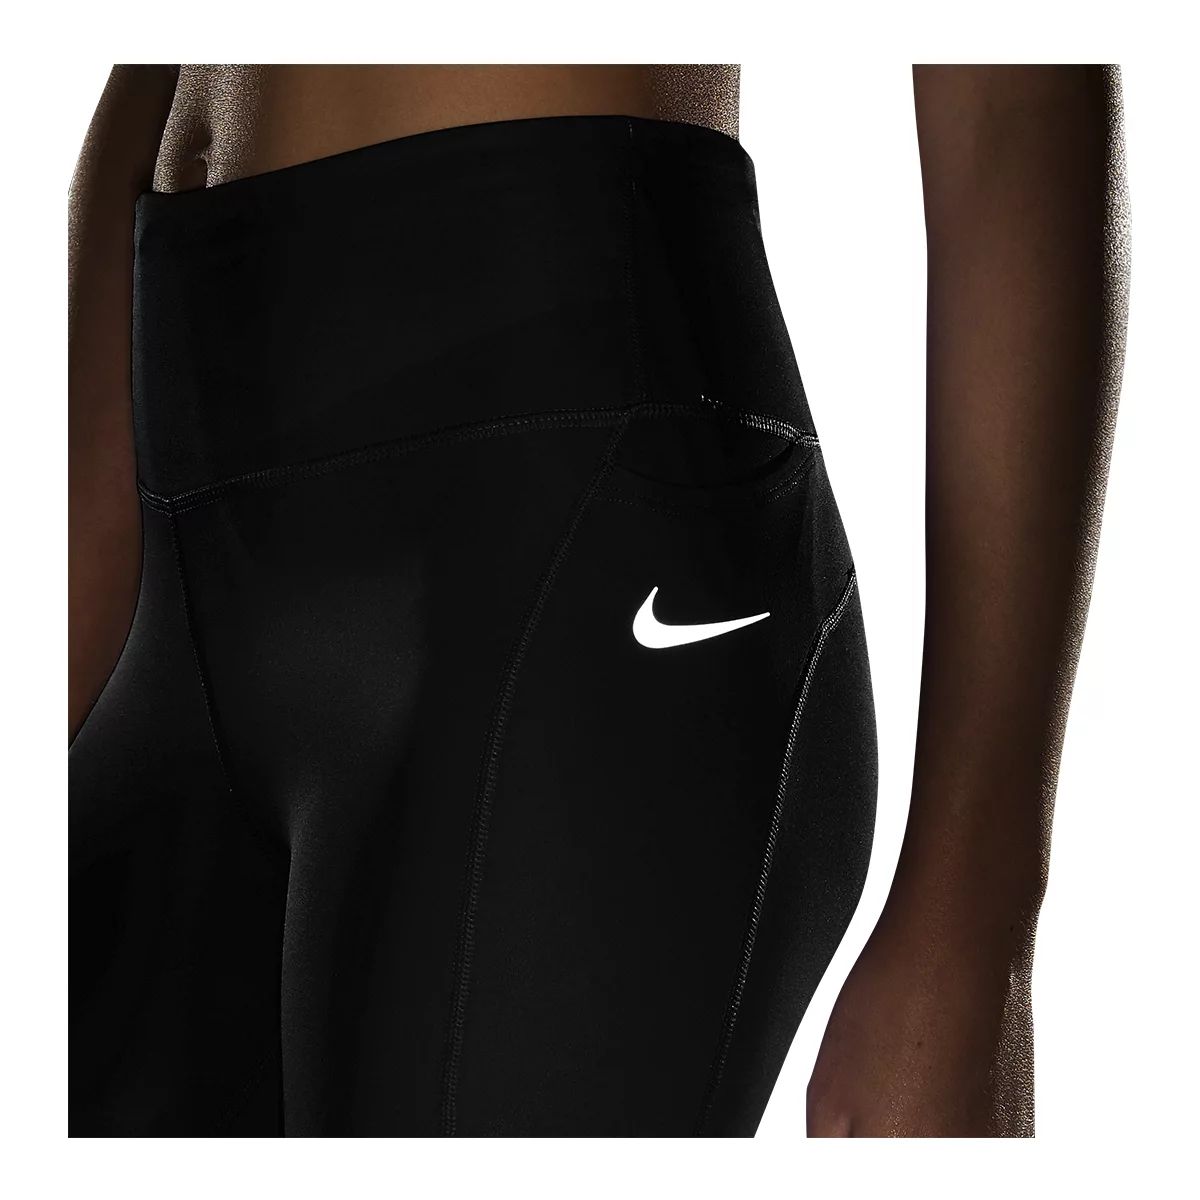 NIKE EPIC FAST TIGHT FIT RUNNING LEGGINGS GYM HIGH WAIST RRP £50 BNWT SMALL